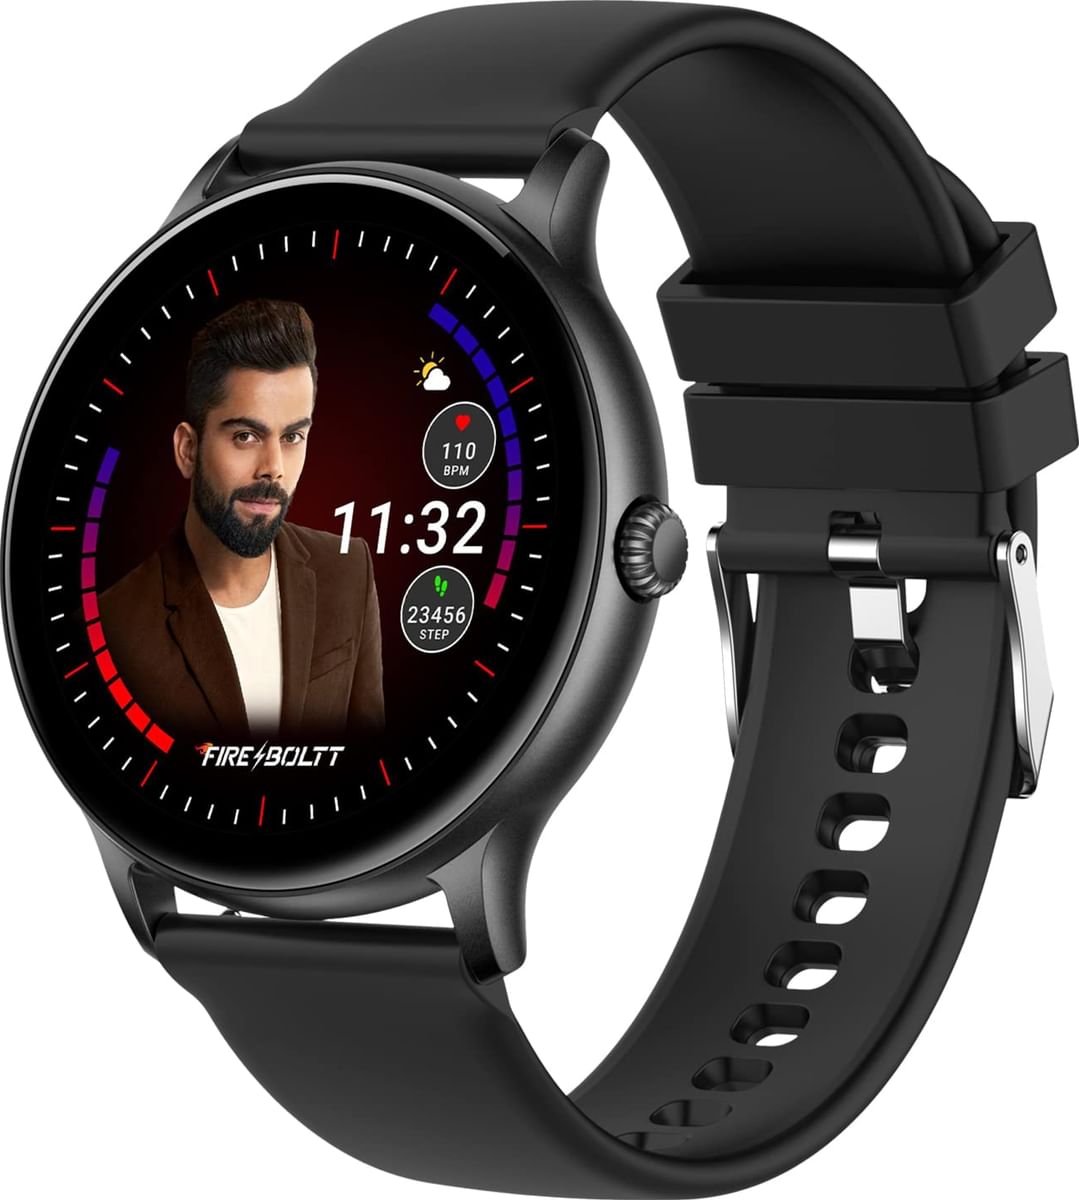 Fire Boltt Phoenix Smartwatch Price In India 2023, Full Specs Review